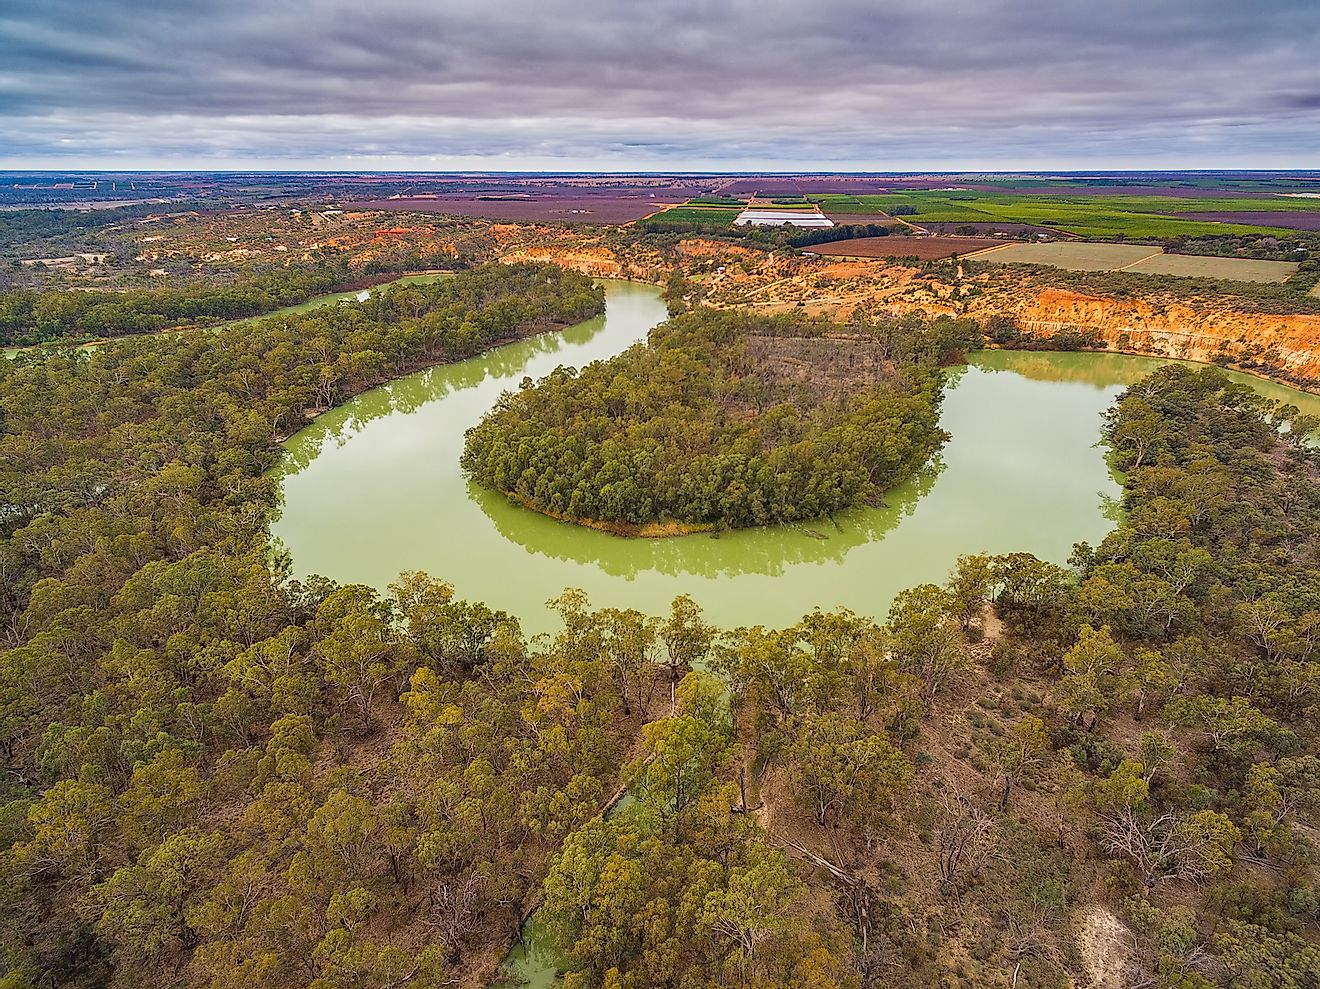 Meandering Murray River in South Australia.